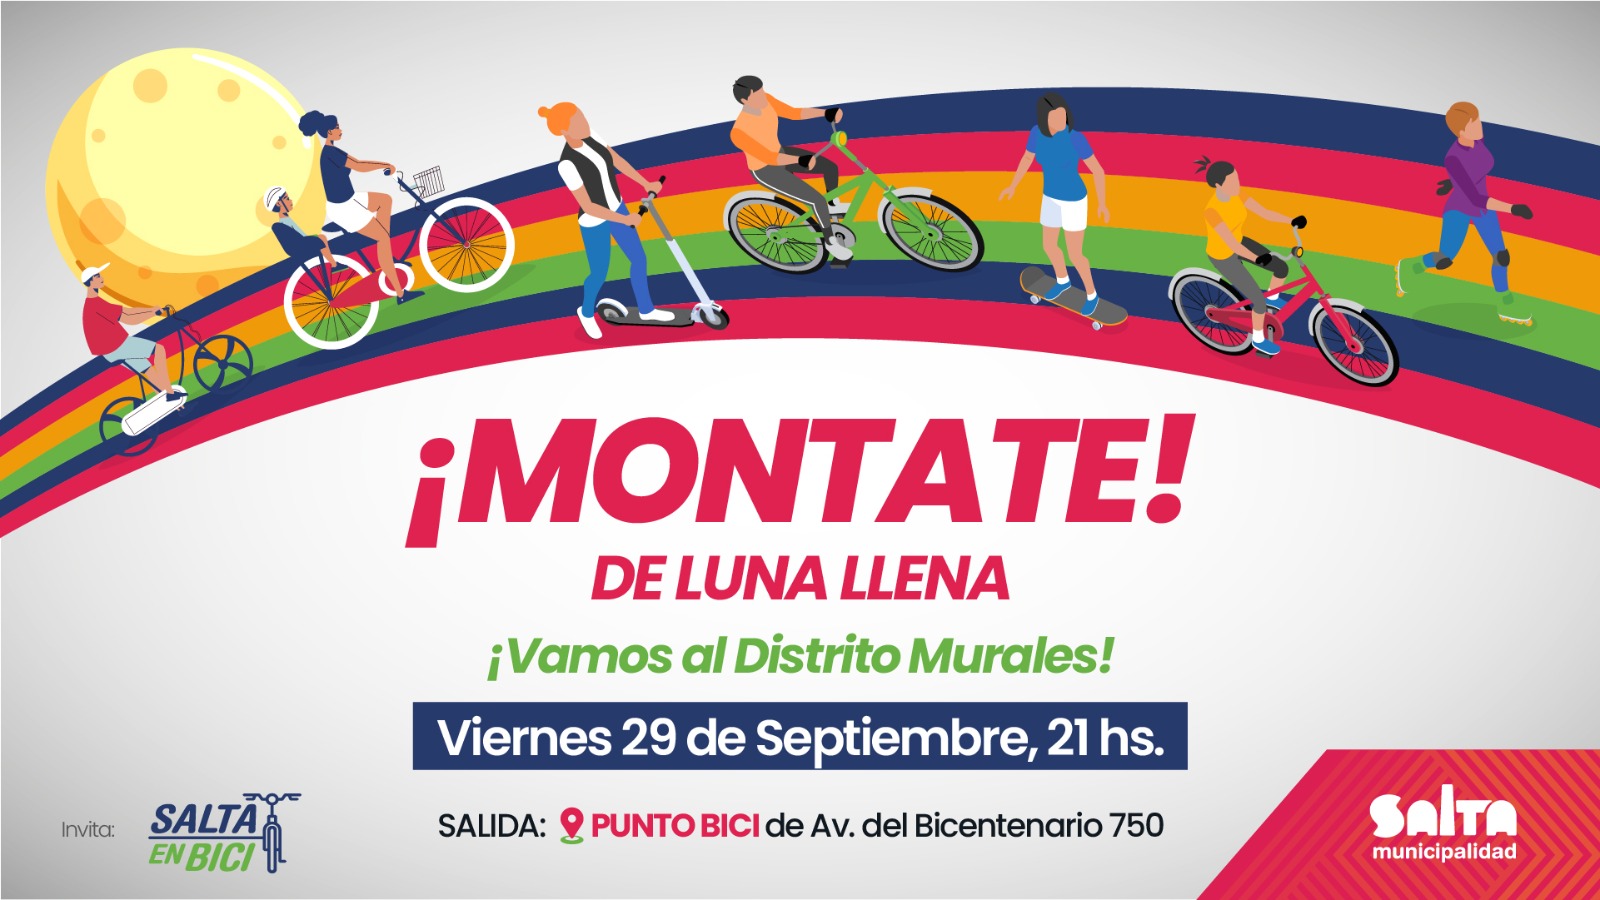 flyer montate